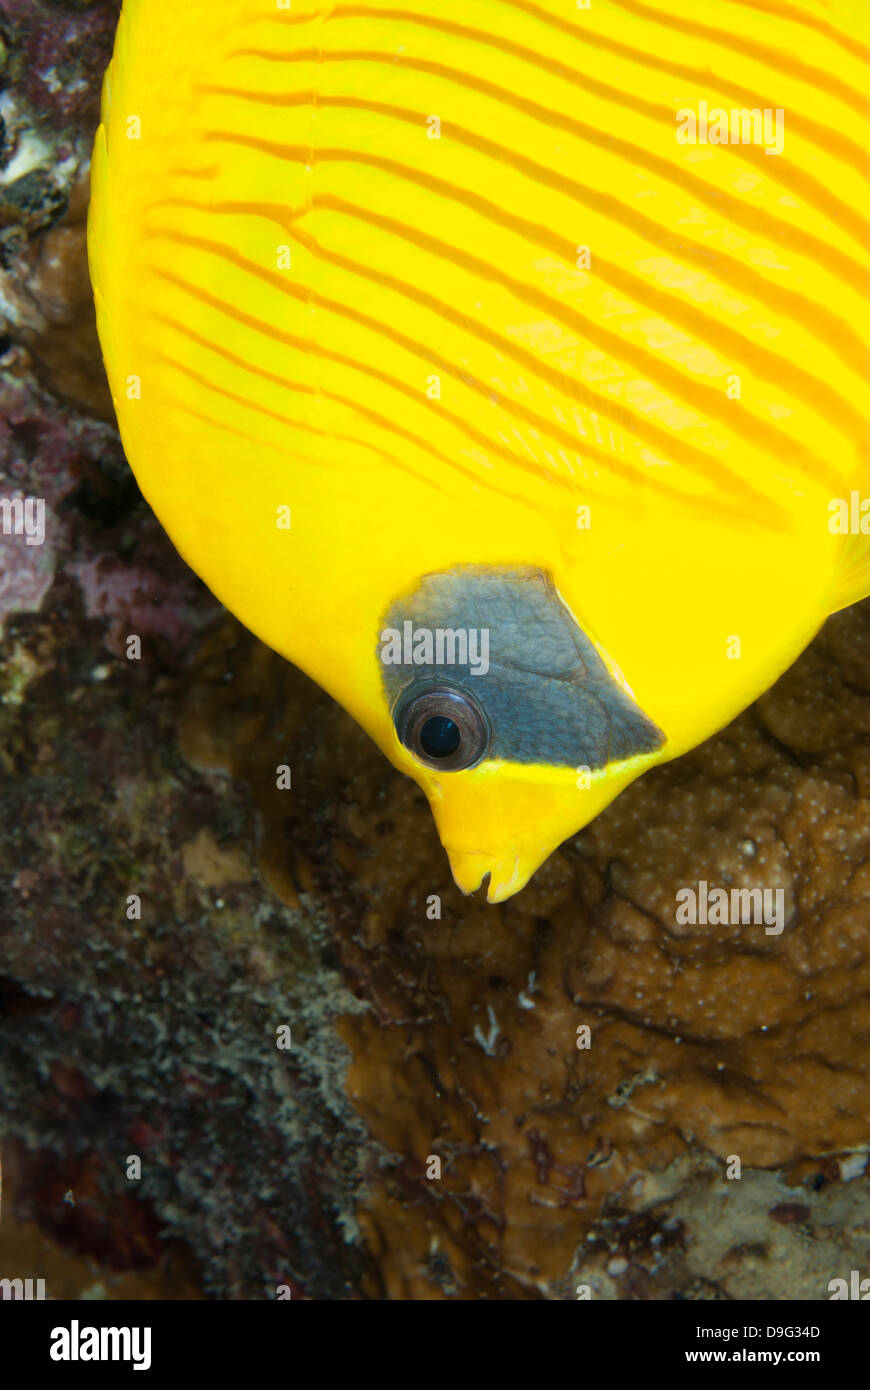 Masked butterfly fish (Chaetodon semilarvatus) close-up, Naama Bay, off Sharm el-Sheikh, Sinai, Red Sea, Egypt, Africa Stock Photo